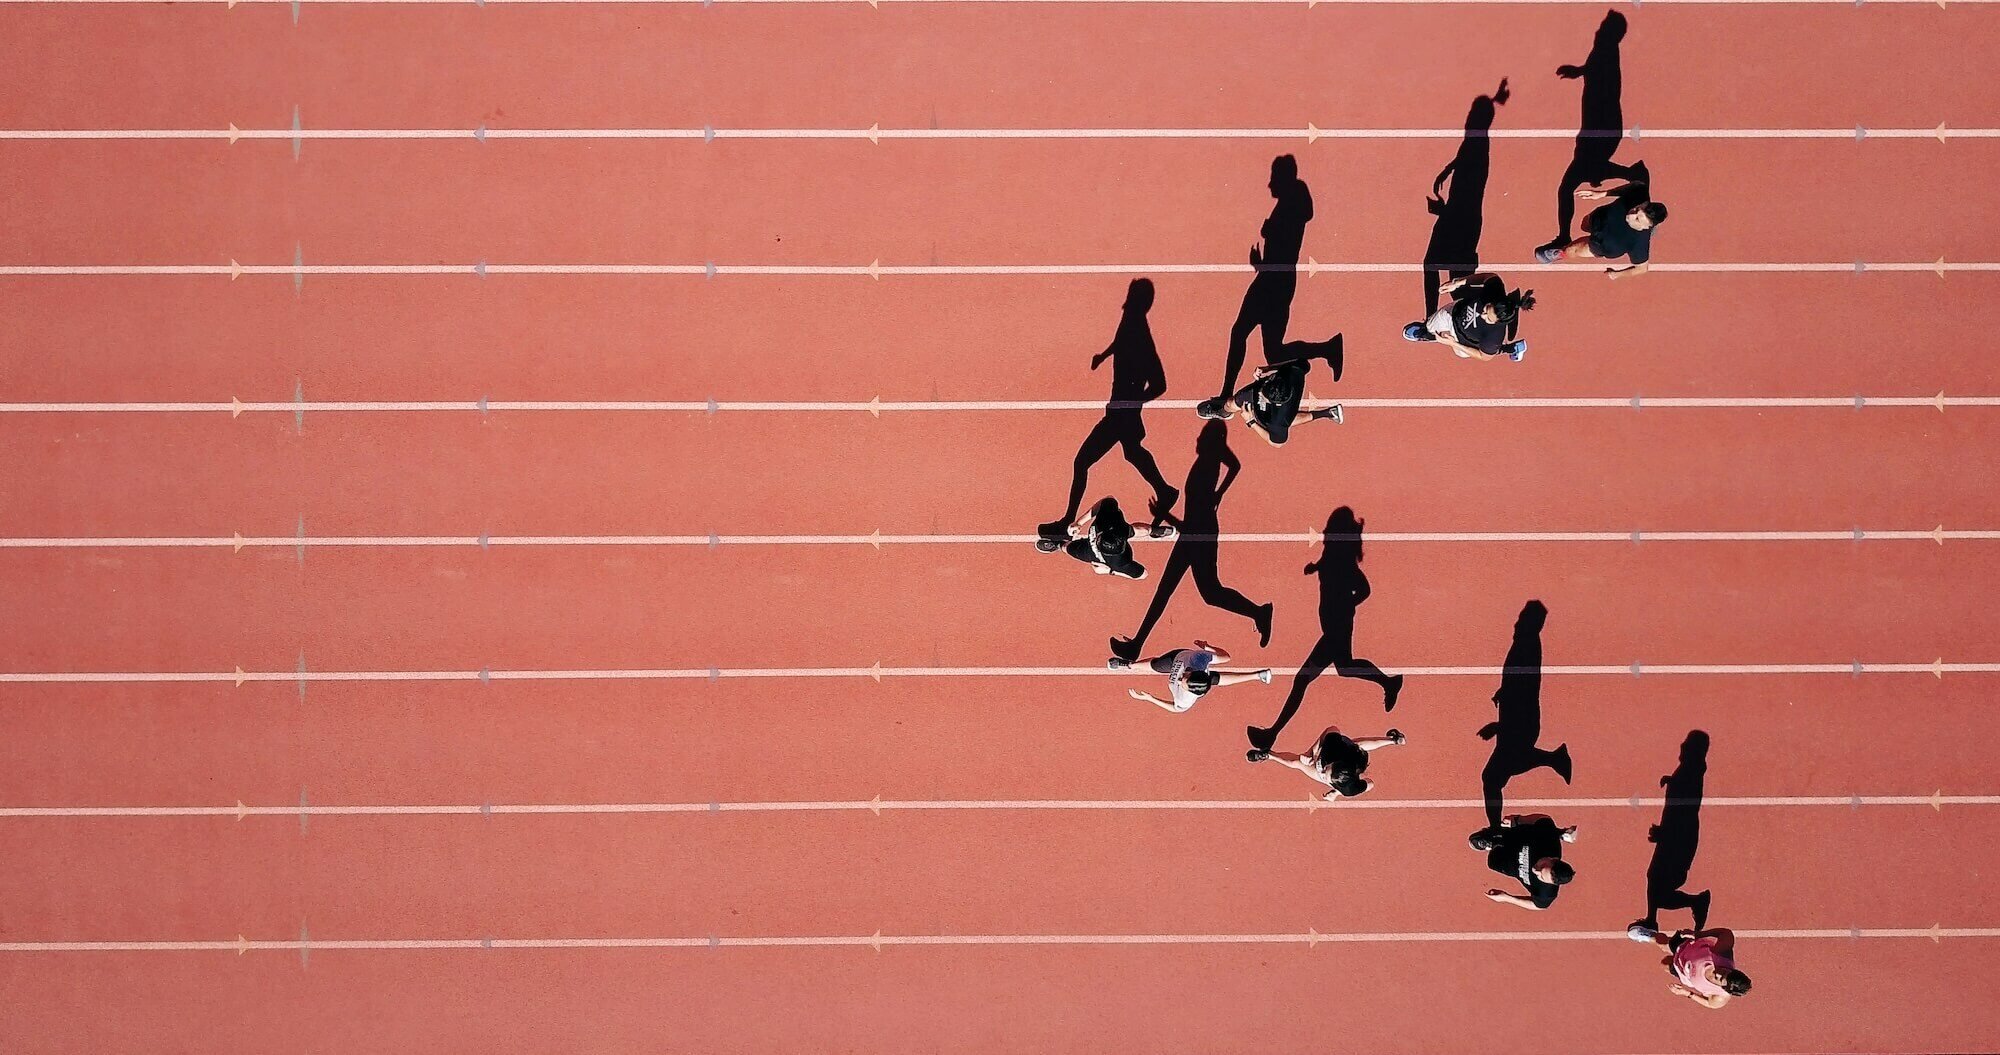 Agile Innovation: How to Embrace Agile Leadership to Innovate at Speed